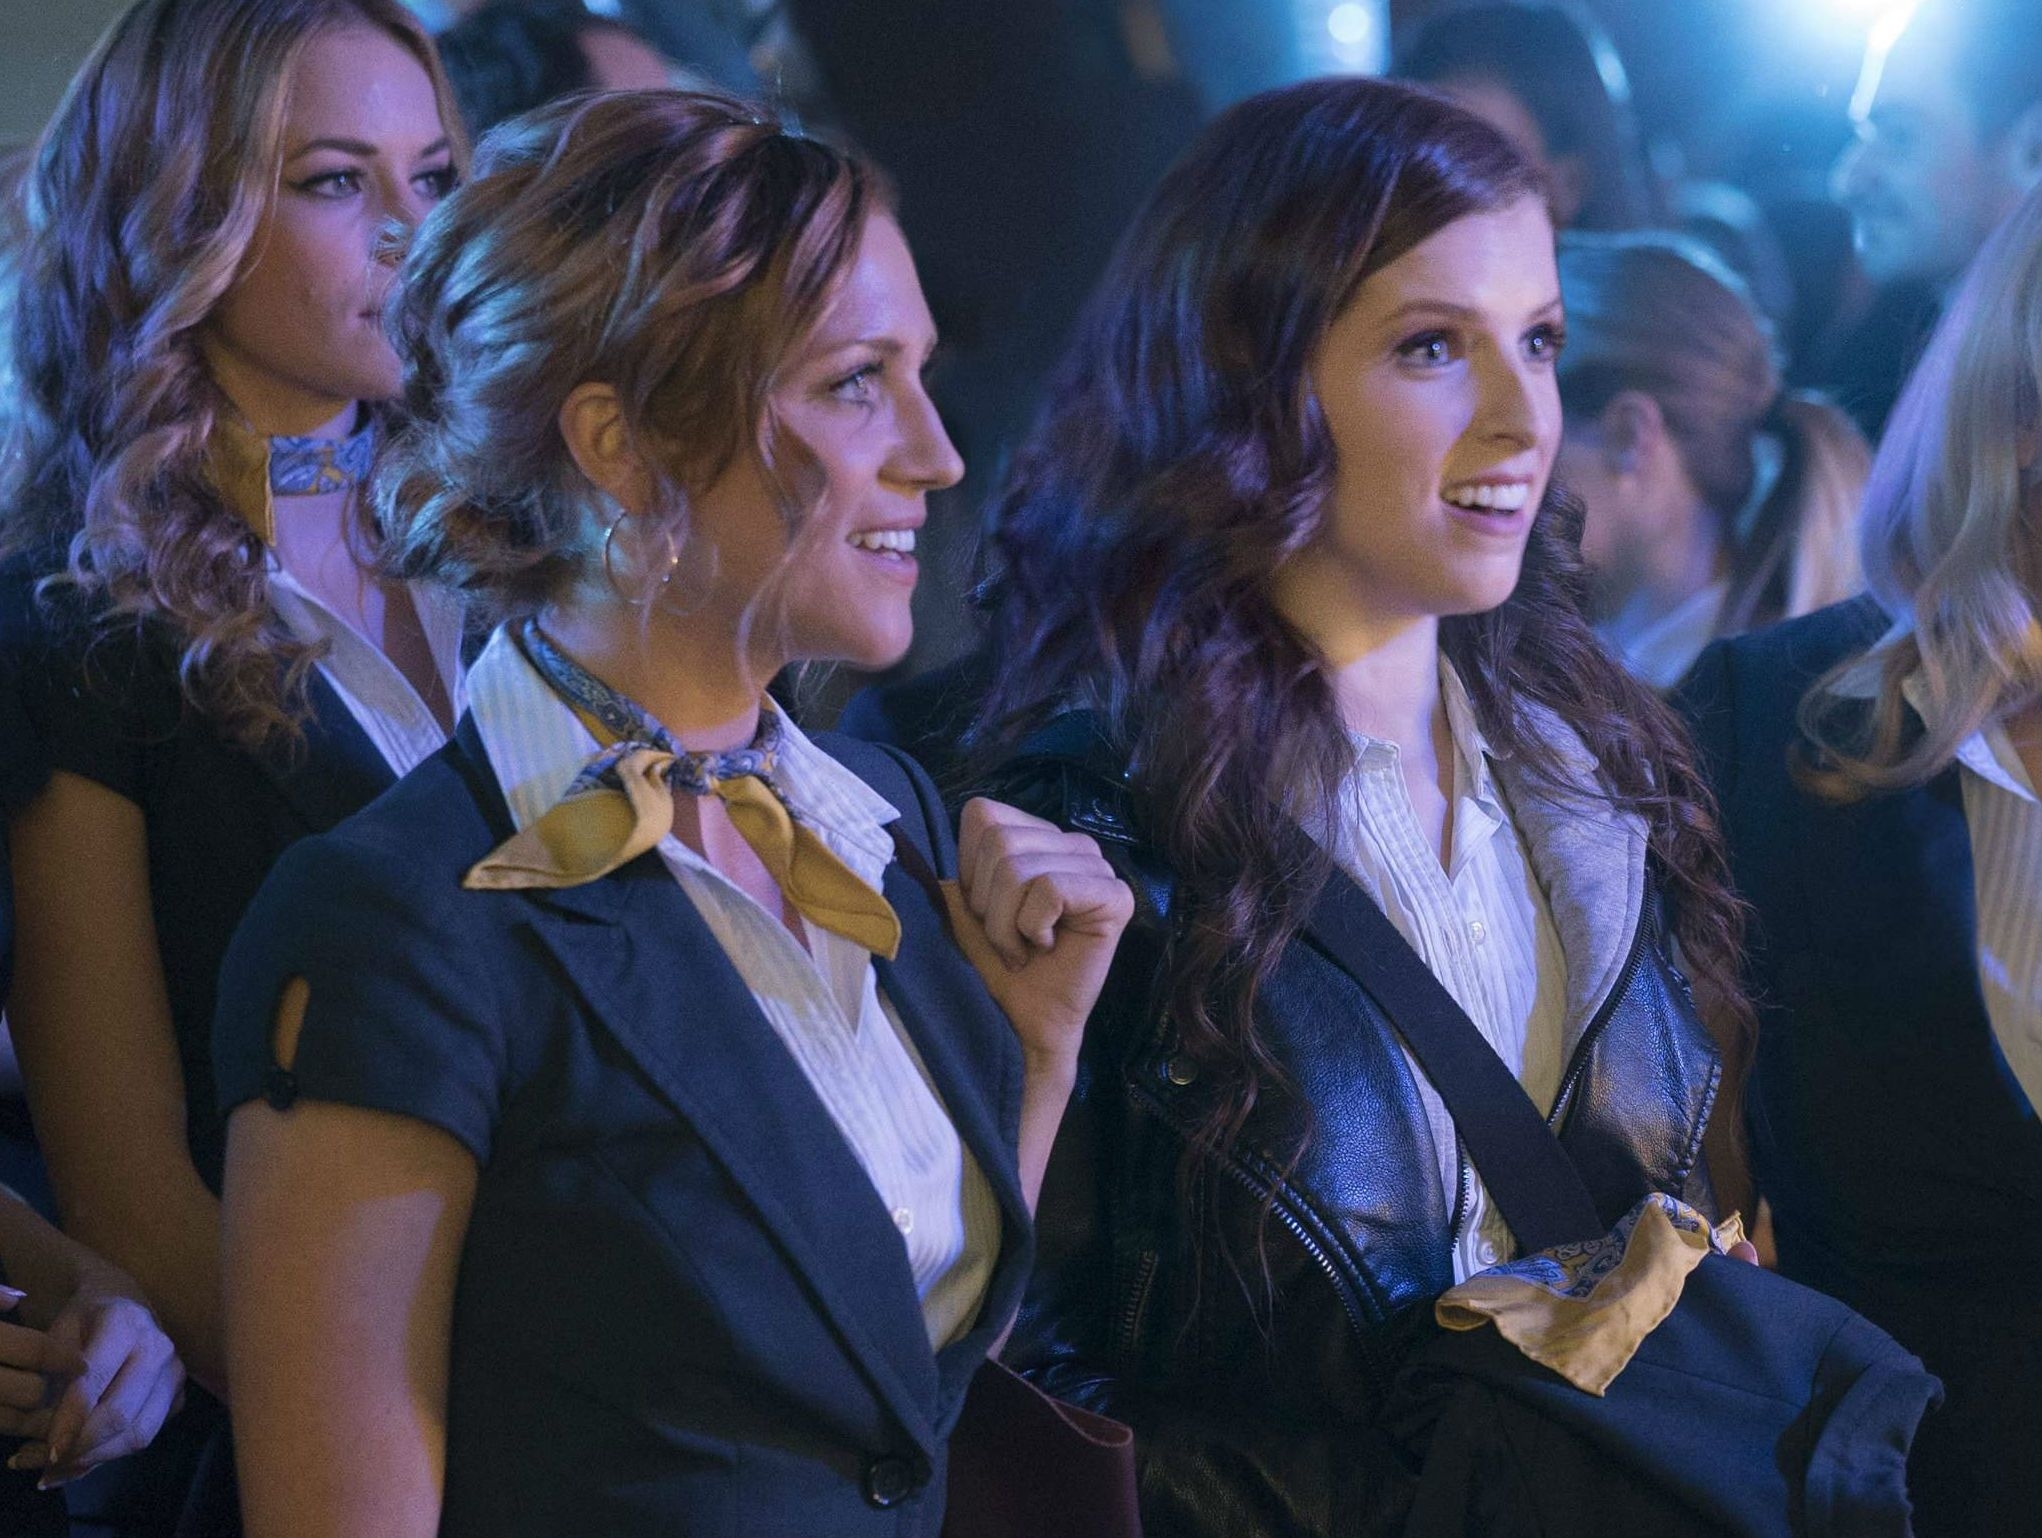 Anna Kendrick and Brittany Snow in character at an event in the movie &quot;Pitch Perfect&quot;. They wear matching outfits with scarves